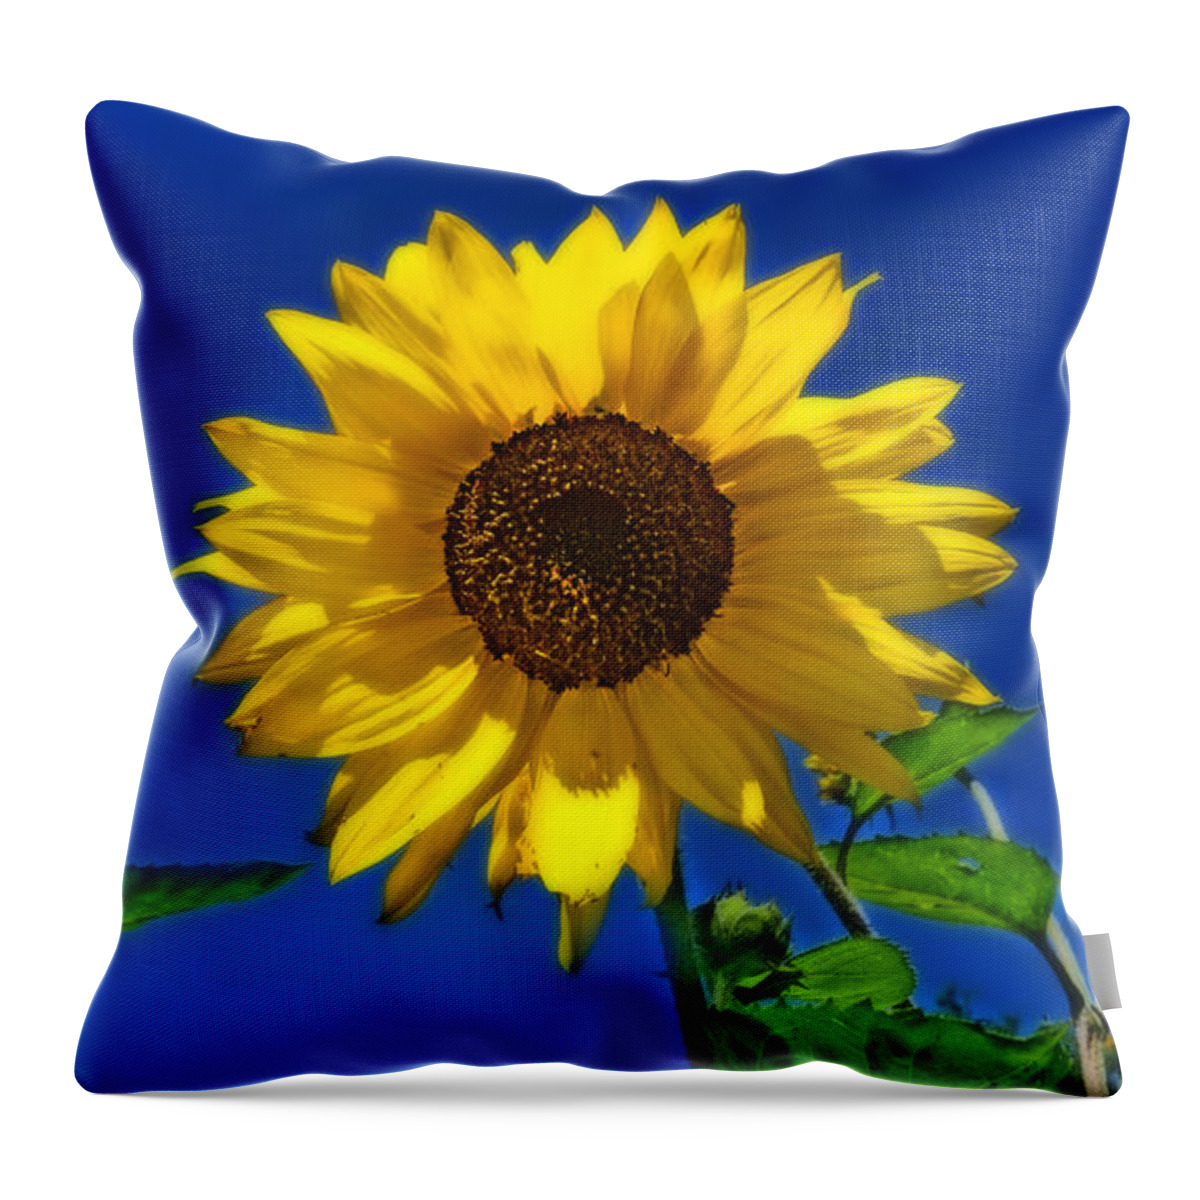 Sunflowers Throw Pillow featuring the photograph Maize 'N Blue by Amanda Smith